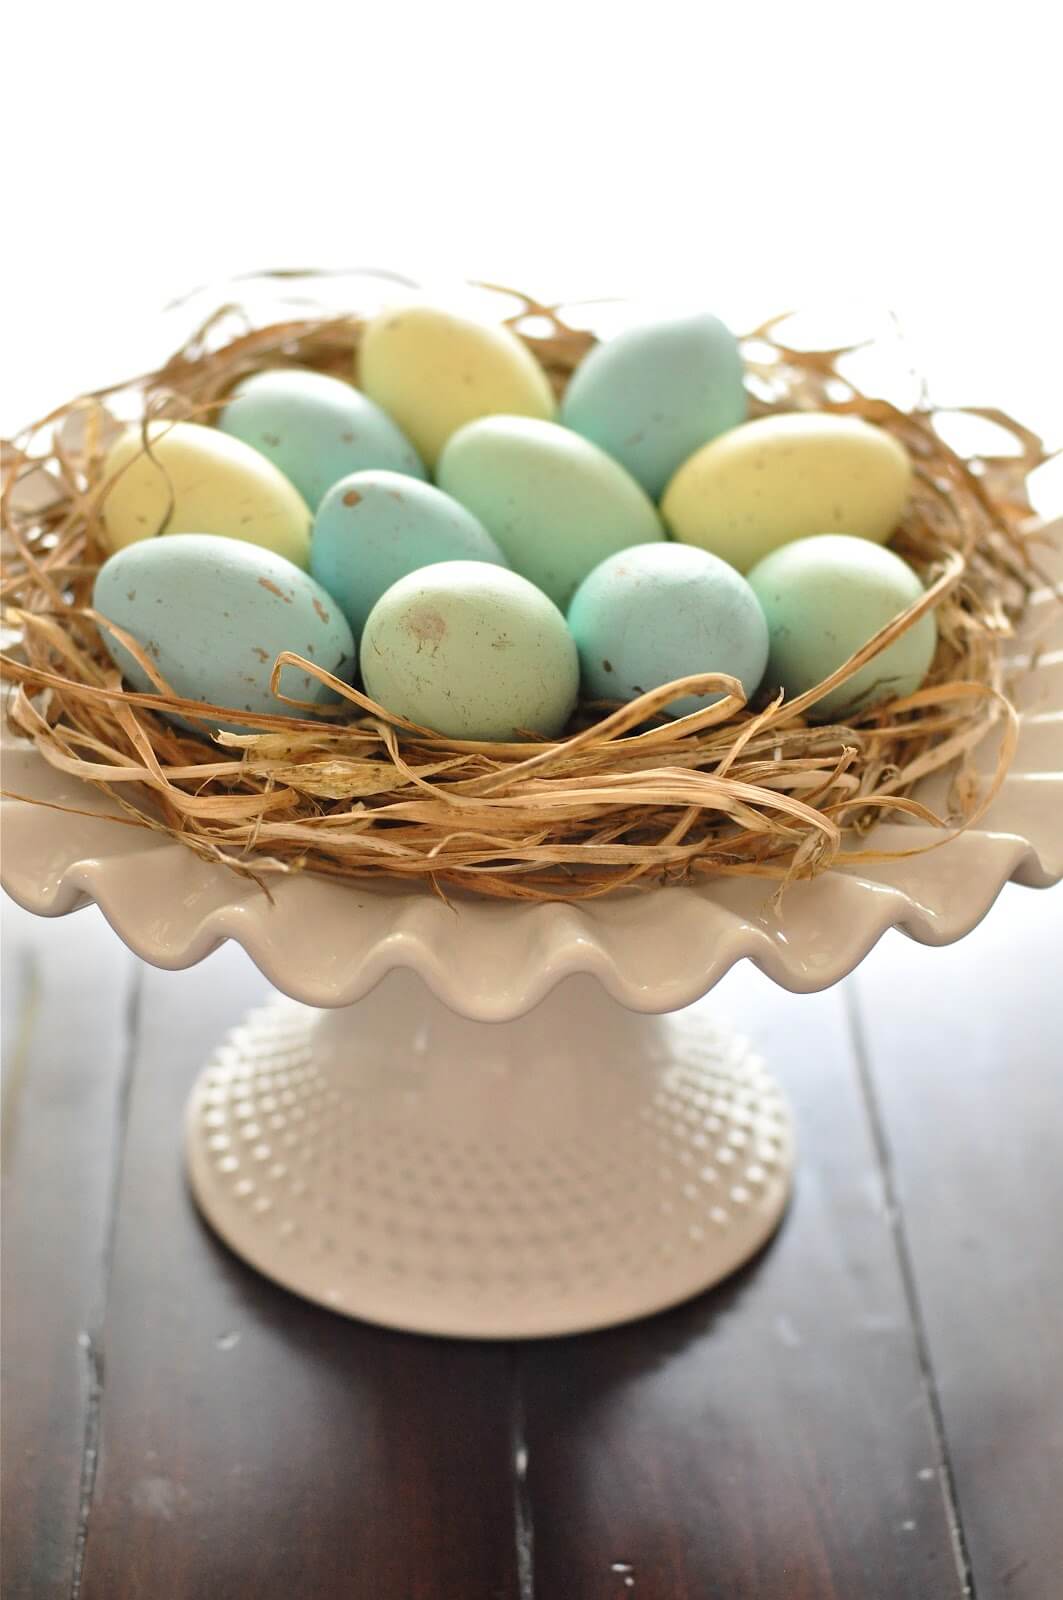 15 Cute DIY Easter Centerpiece Ideas That Will Brighten Up Your Table